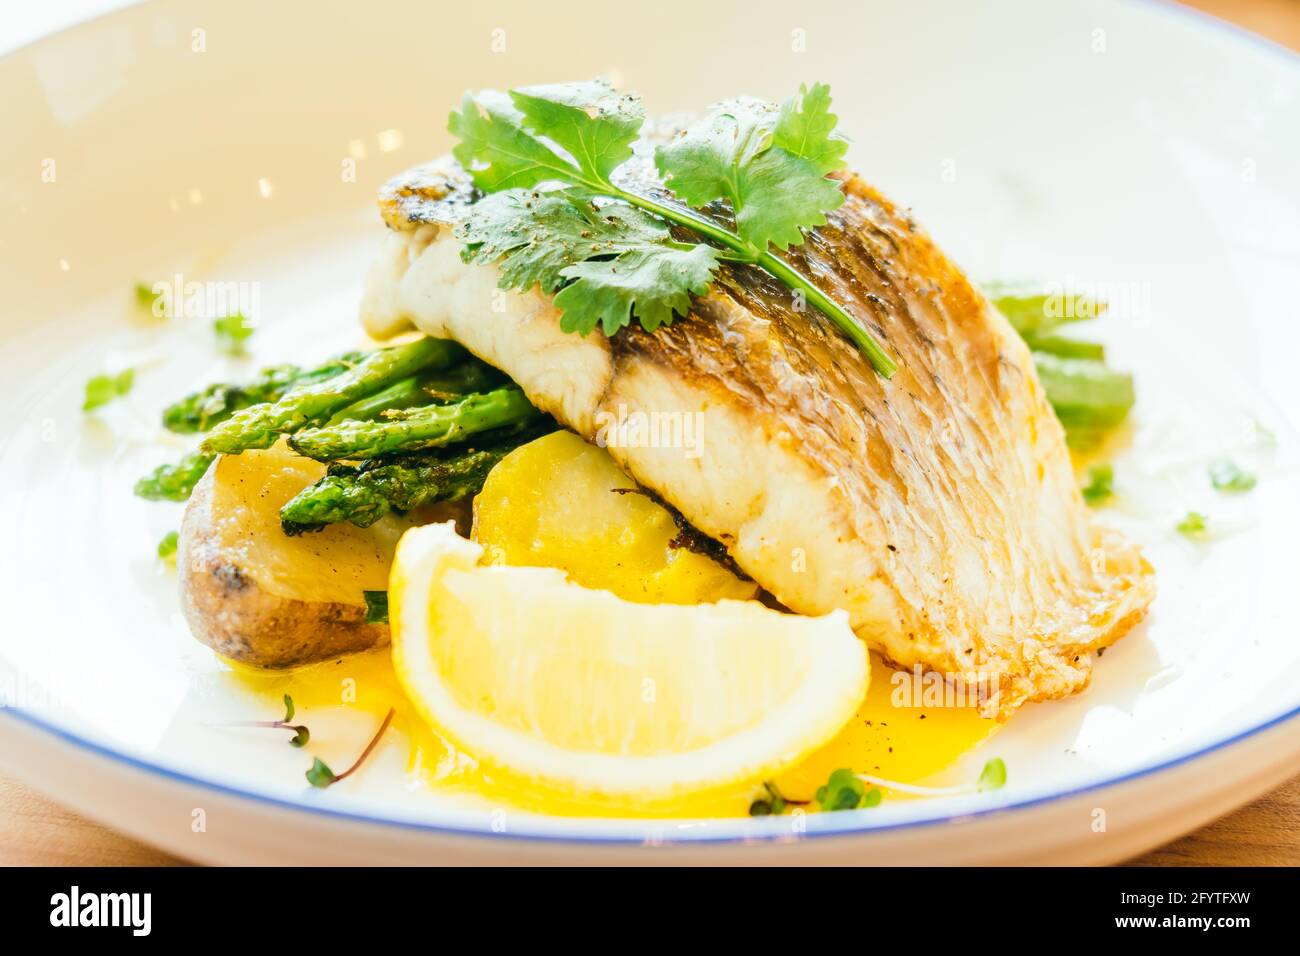 Grilled Barramundi or pangasius fish and meat steak with vegetable and lemon in plate - Healthy food style Stock Photo